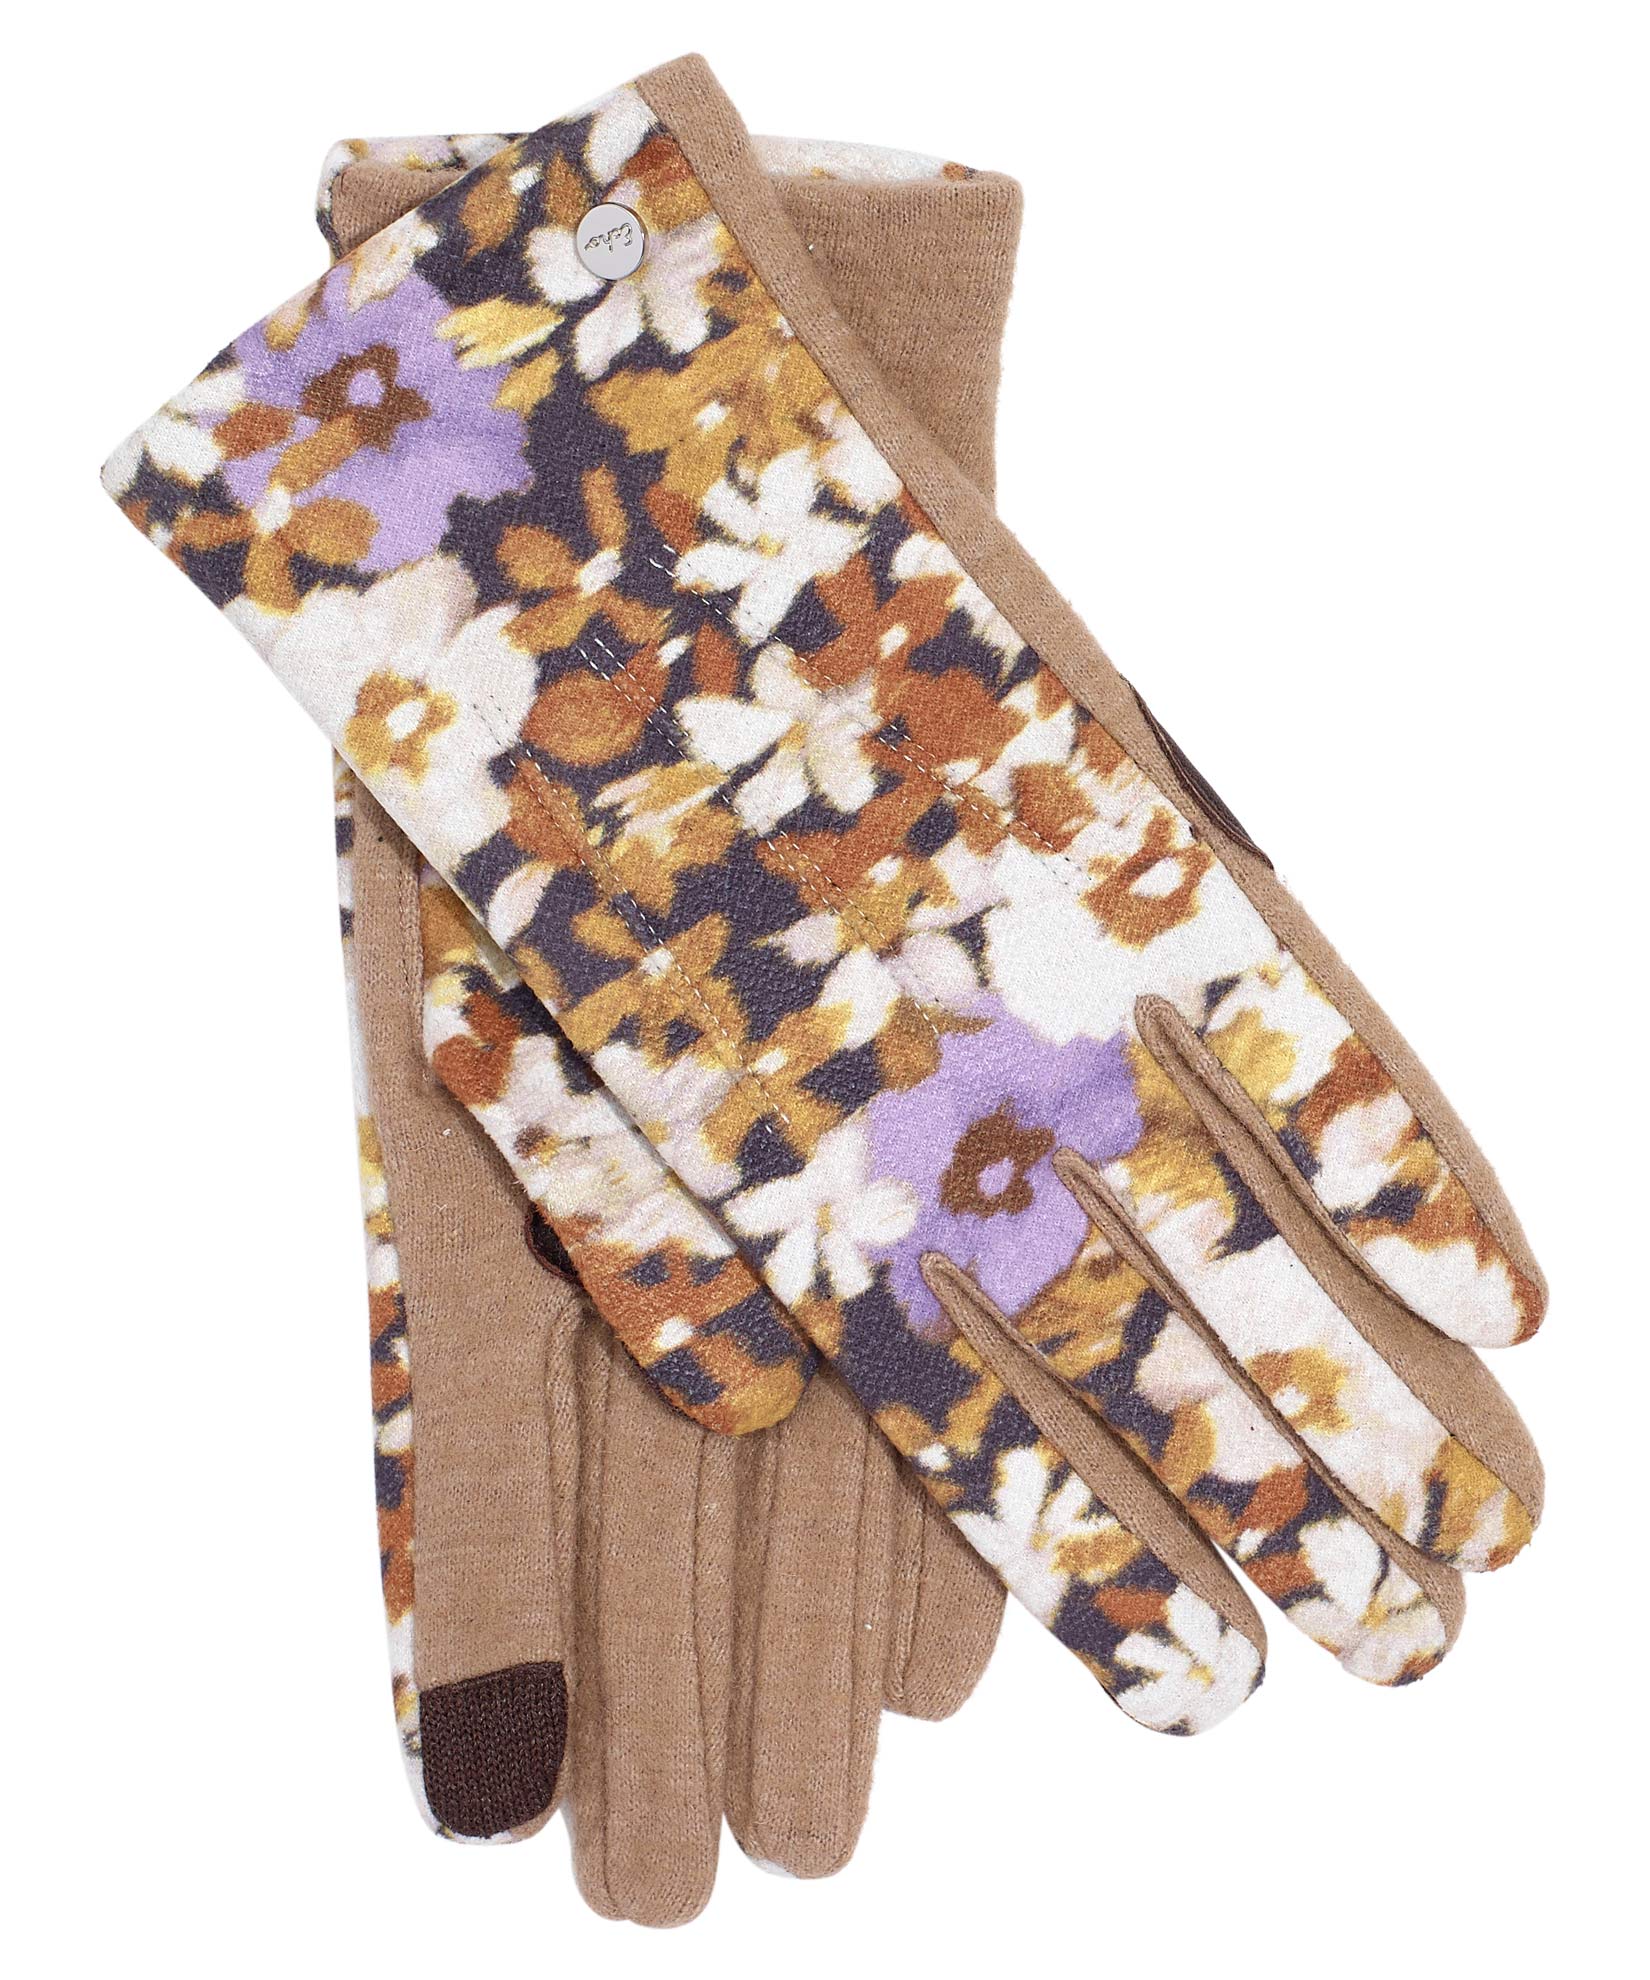 Floral Print Classic Touch Glove in color Goldenrod